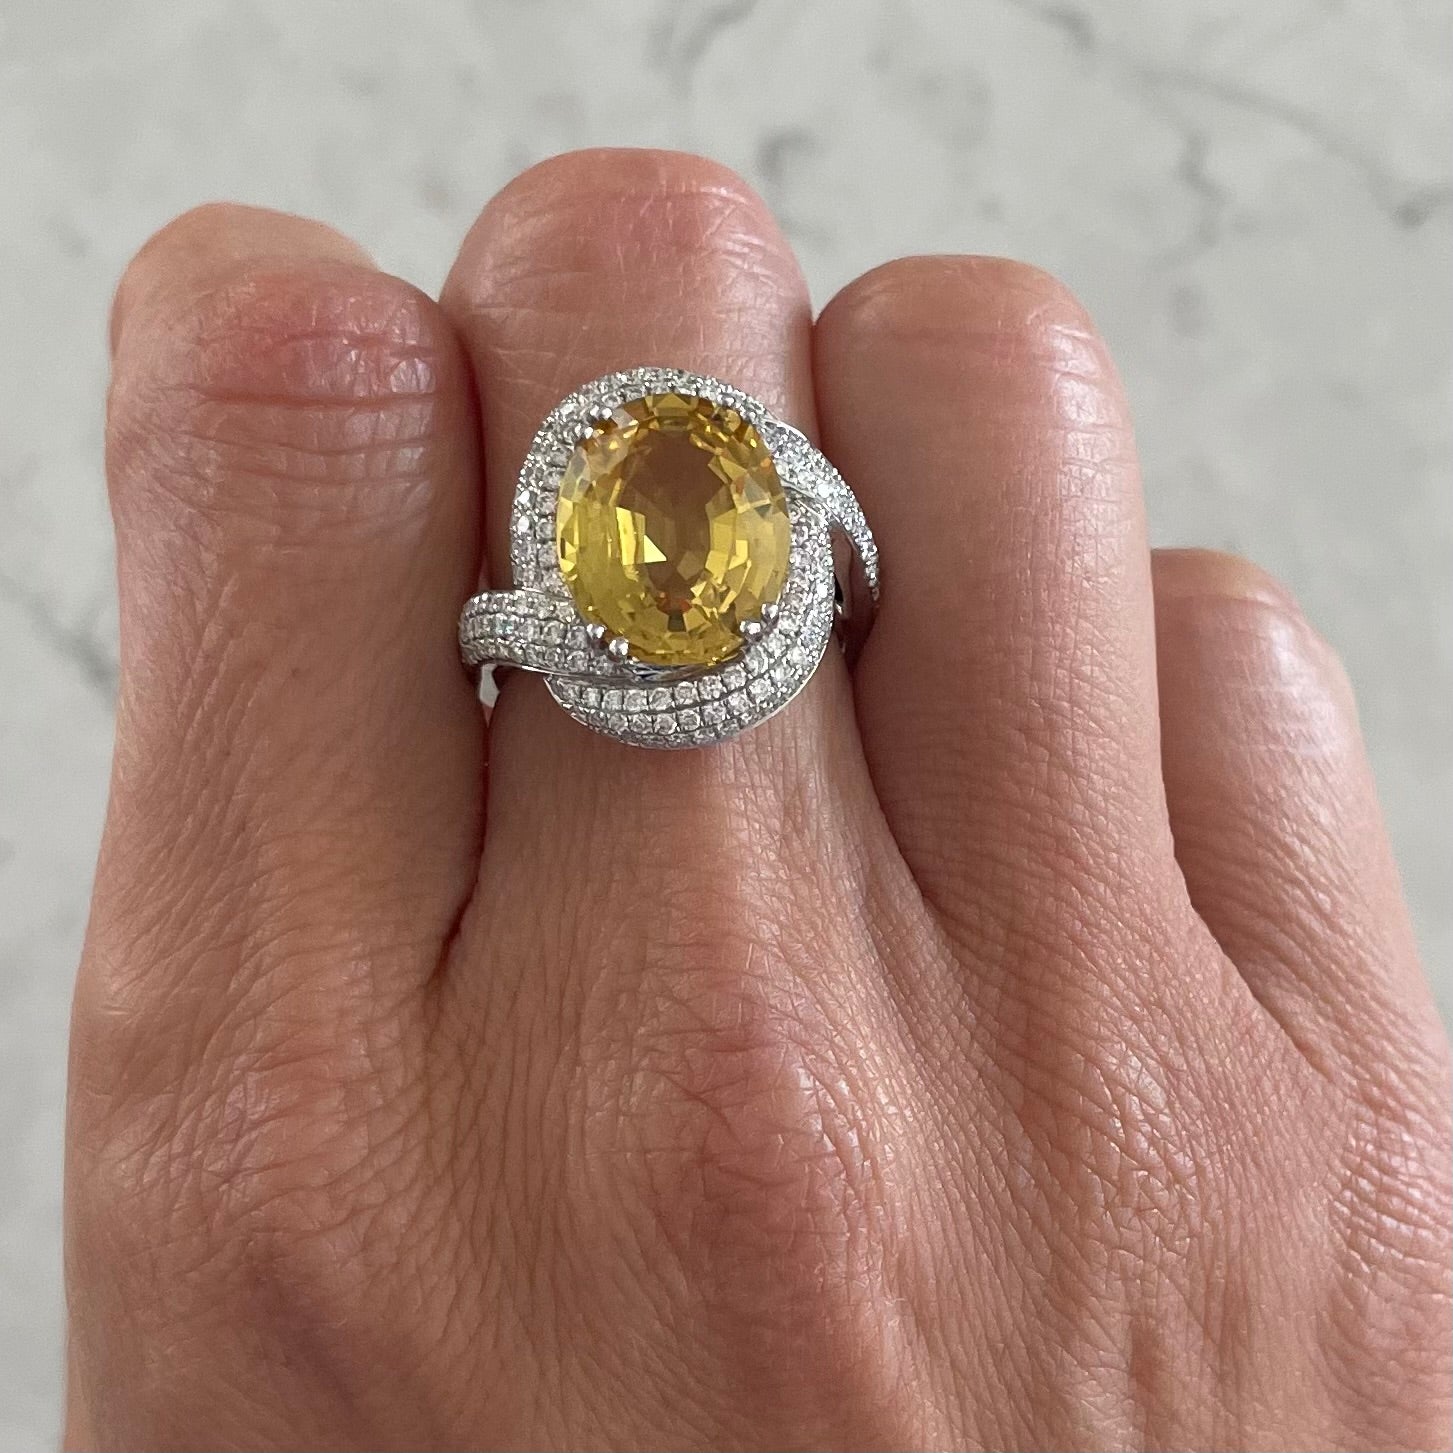 7.1 ct Yellow Sapphire Ring in 18k While Gold